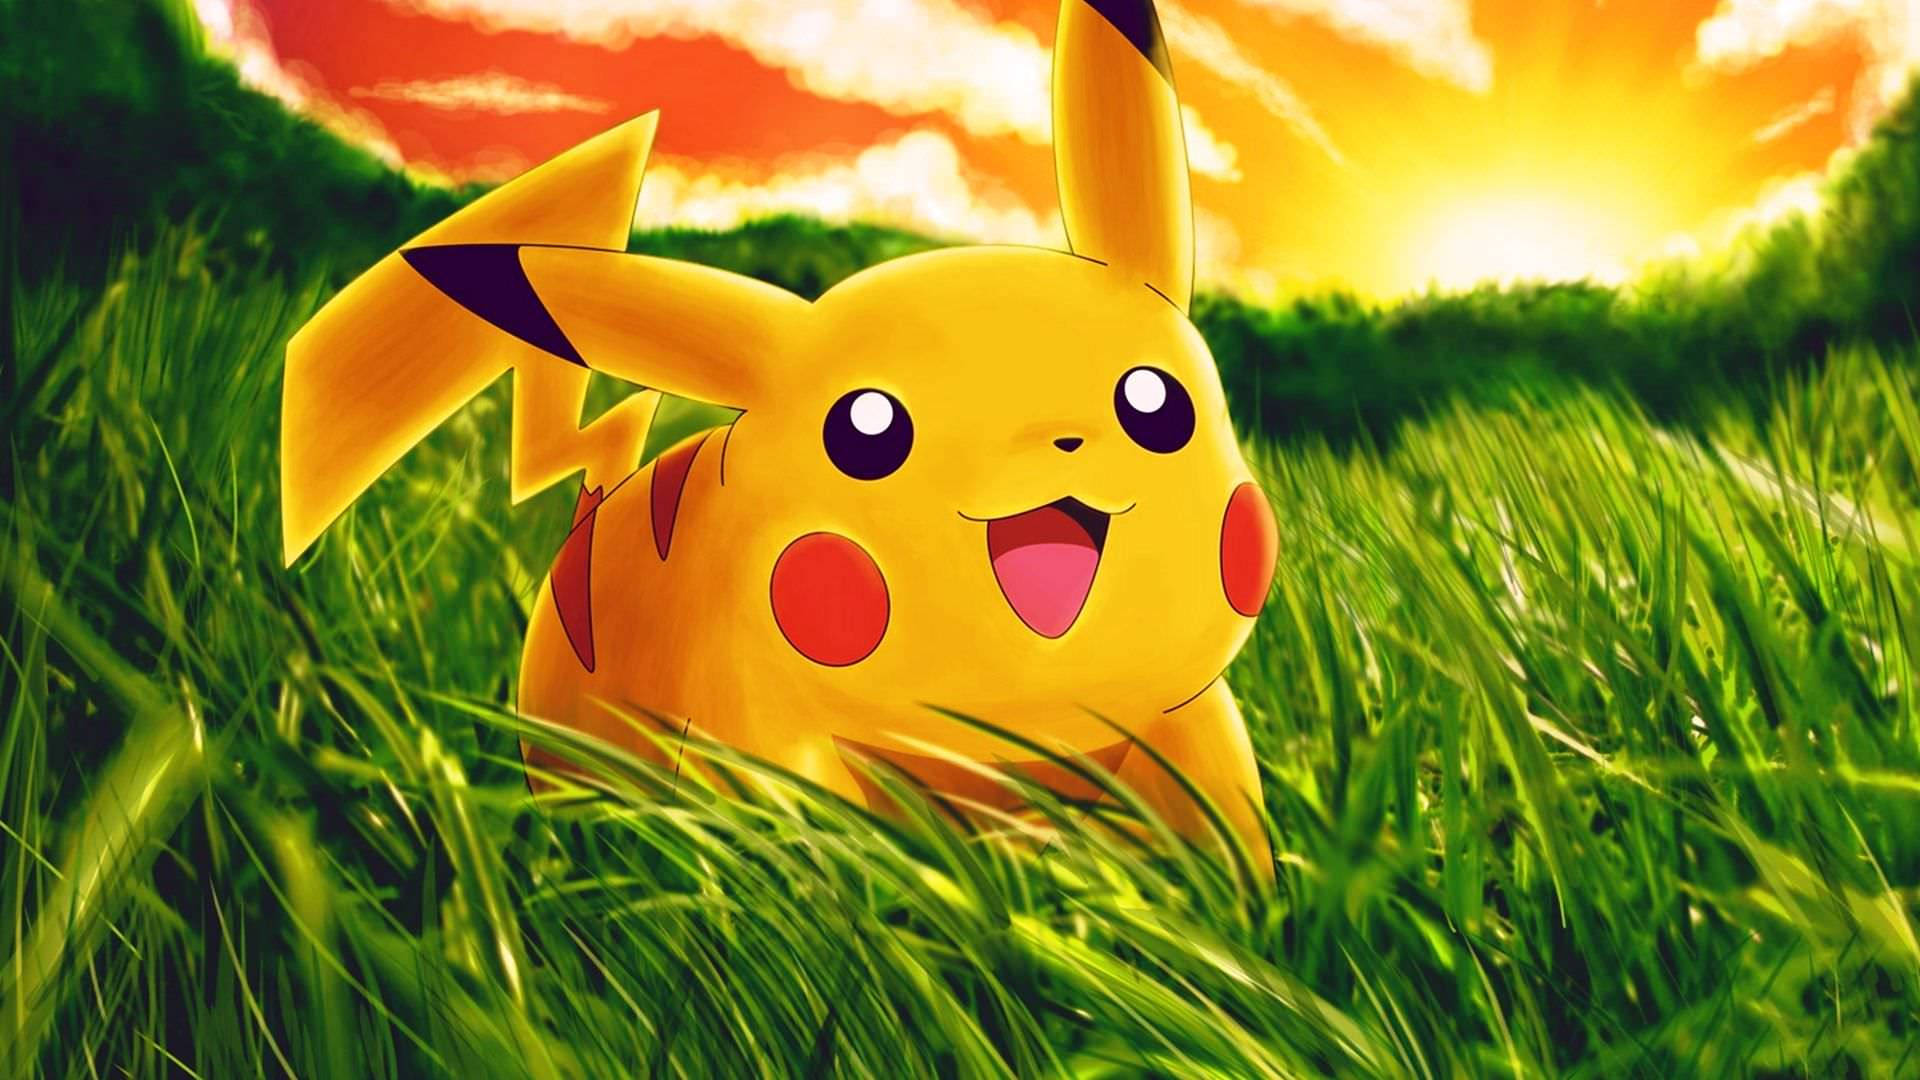 A pikachu in the grass with sun shining behind it - Pikachu